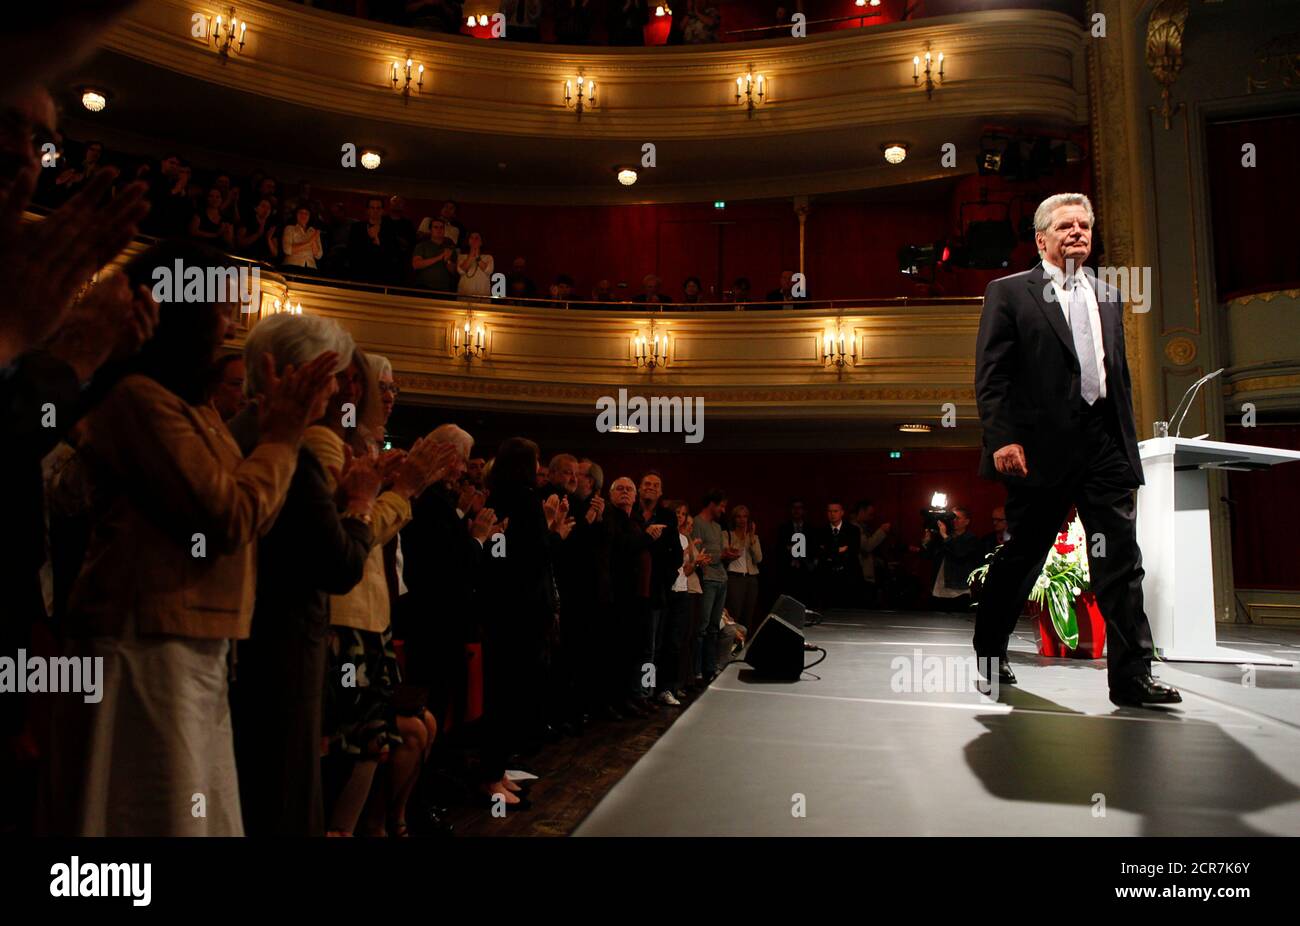 People applaud German presidential candidate Gauck after his speech in the Deutsches Theater (German Theatre) in Berlin, June 22, 2010. The vote for the largely ceremonial post of German president is shaping up as a big test for Chancellor Angela Merkel who has been dogged by falling popularity, policy spats in her centre-right coalition and accusations of weak leadership. A failure by Merkel to push through the conservative candidate Christian Wulff, the premier of the state of Lower Saxony, would be widely viewed as a major defeat for her. Joachim Gauck, a former Protestant pastor who played Stock Photo